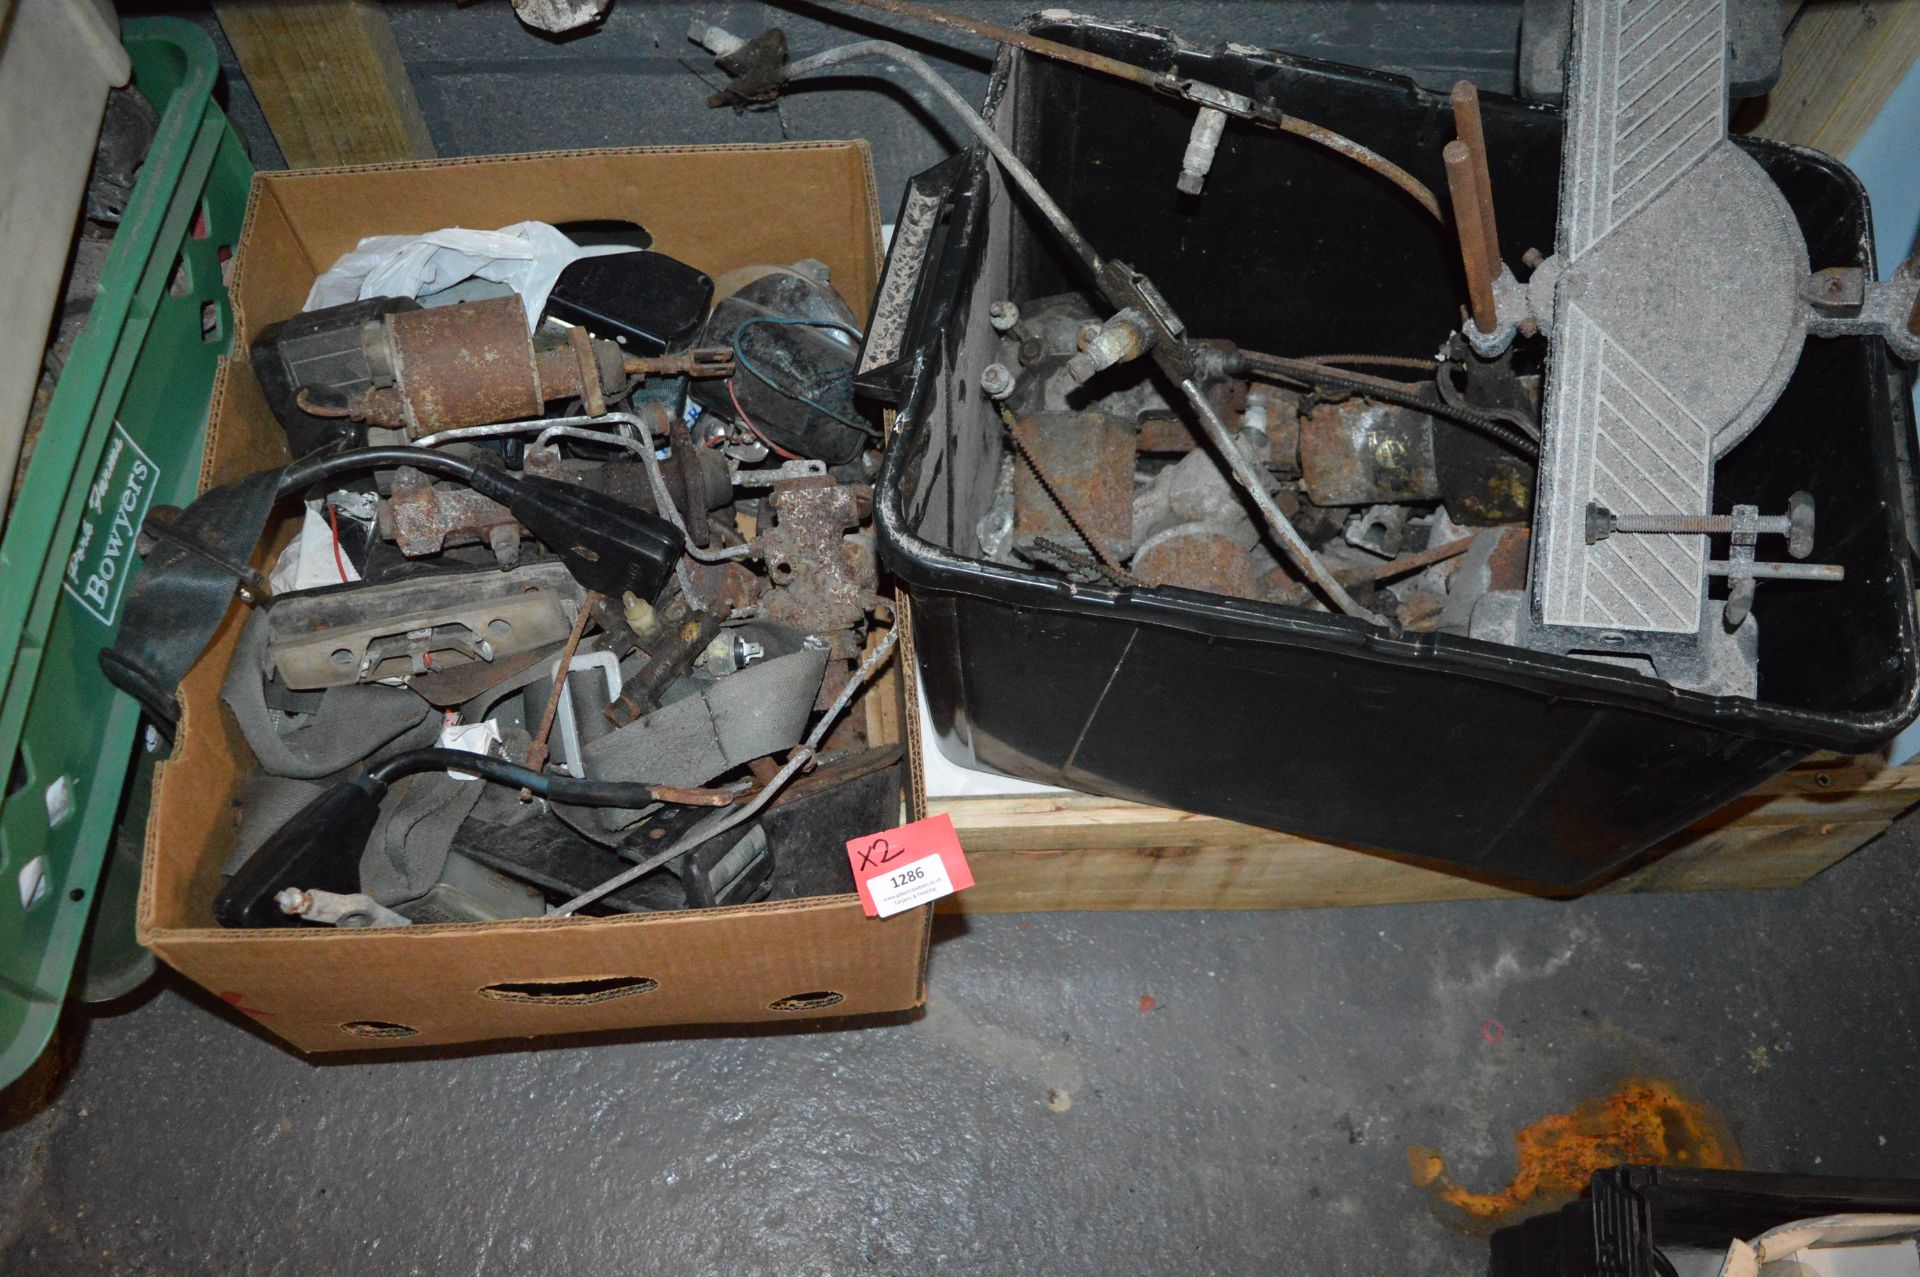 Two Boxes Containing Brake Cylinders, Mini Reservoirs, and a Mini Wiper Motor